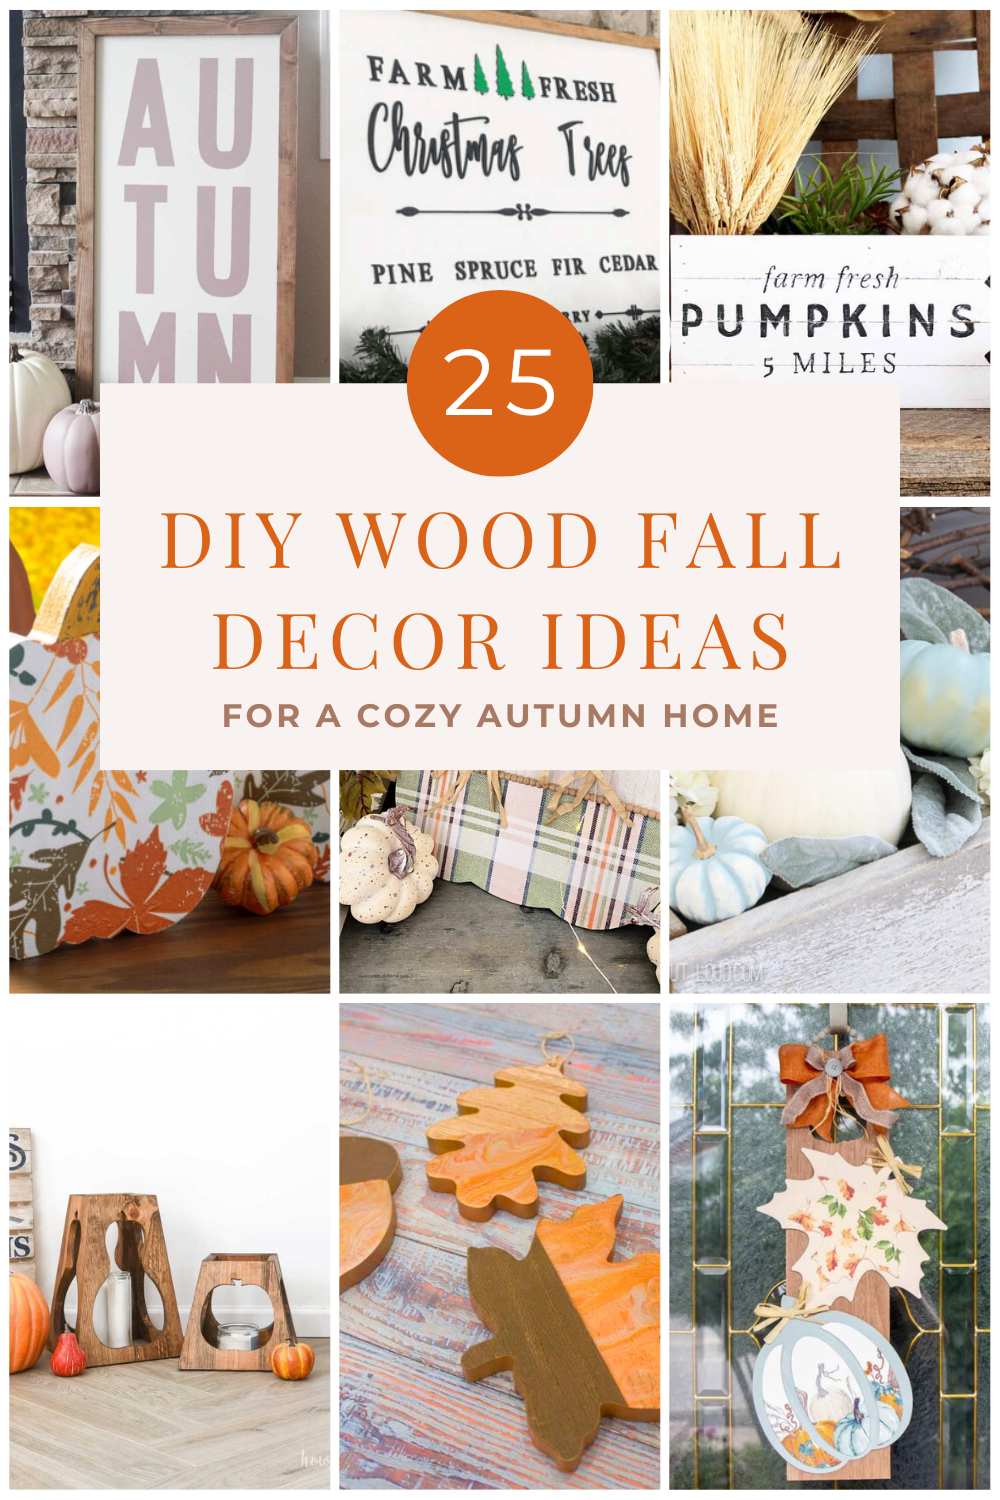 Transform your space with the warmth of autumn using these 25 amazing DIY wood decor ideas, perfect for creating a cozy and inviting home. Embrace the season's charm with crafts that infuse natural beauty into your home ambiance, bringing the fall spirit indoors. Explore these creative and easy wood decor inspirations to add a touch of coziness and style to your living space this autumn.